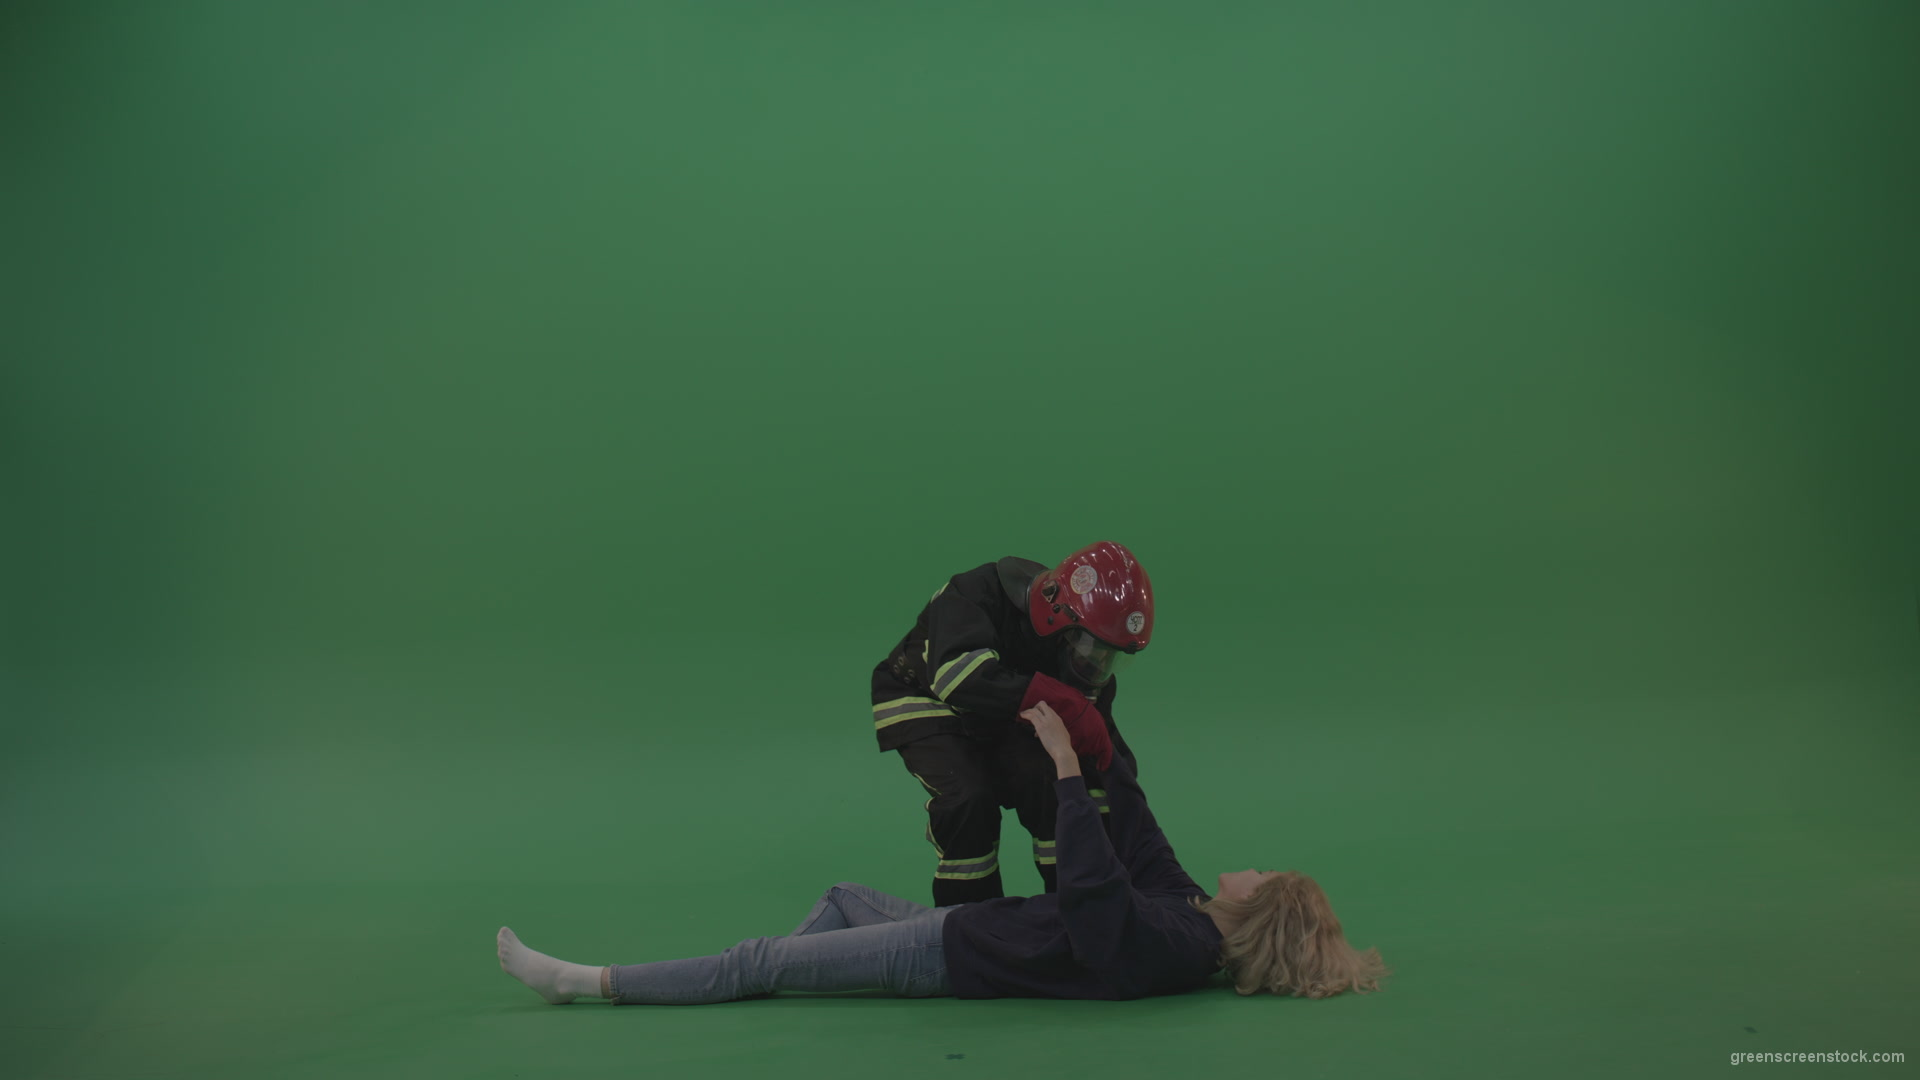 Brave_Fireman_Runs_To_Unconscious_Young_Victim_Girl_Slightly_Wakes_Her_Up_Takes_On_Strong_Hands_And_Carries_Towards_Safety_On_Green_Screen_Wall_Background_005 Green Screen Stock